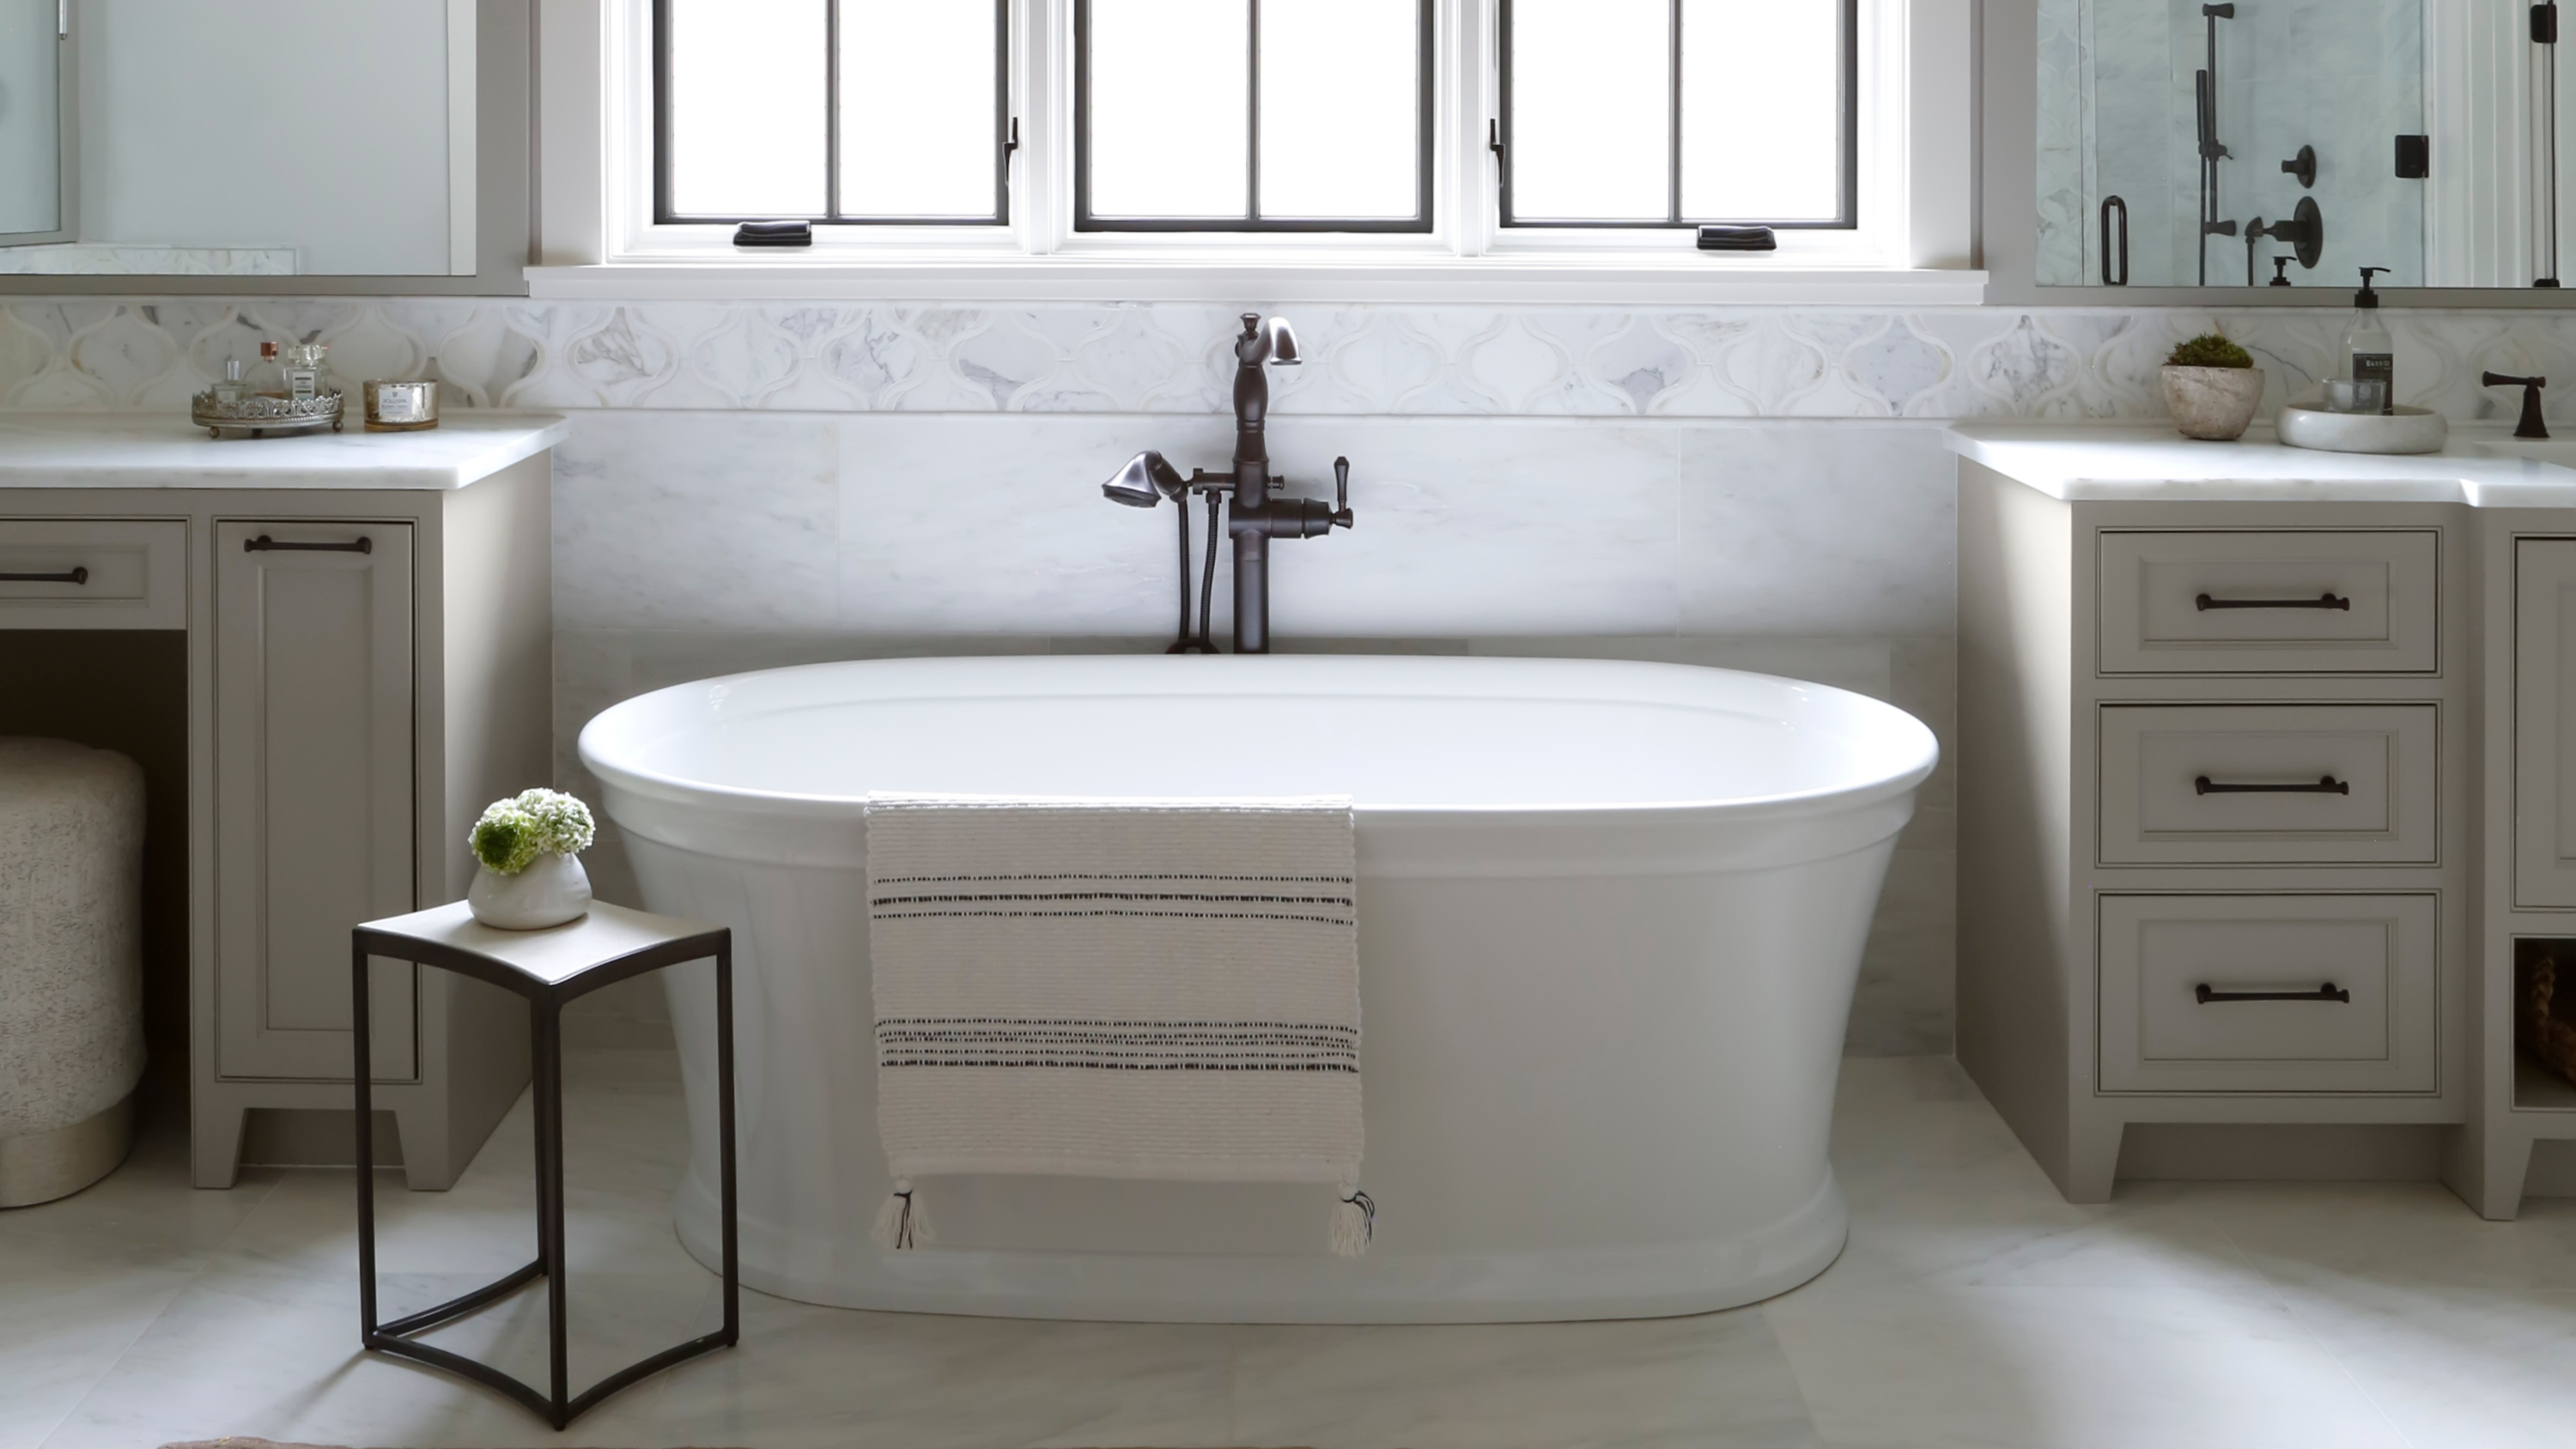 11 bathroom finishing touches that will take your scheme to the next level  | Livingetc